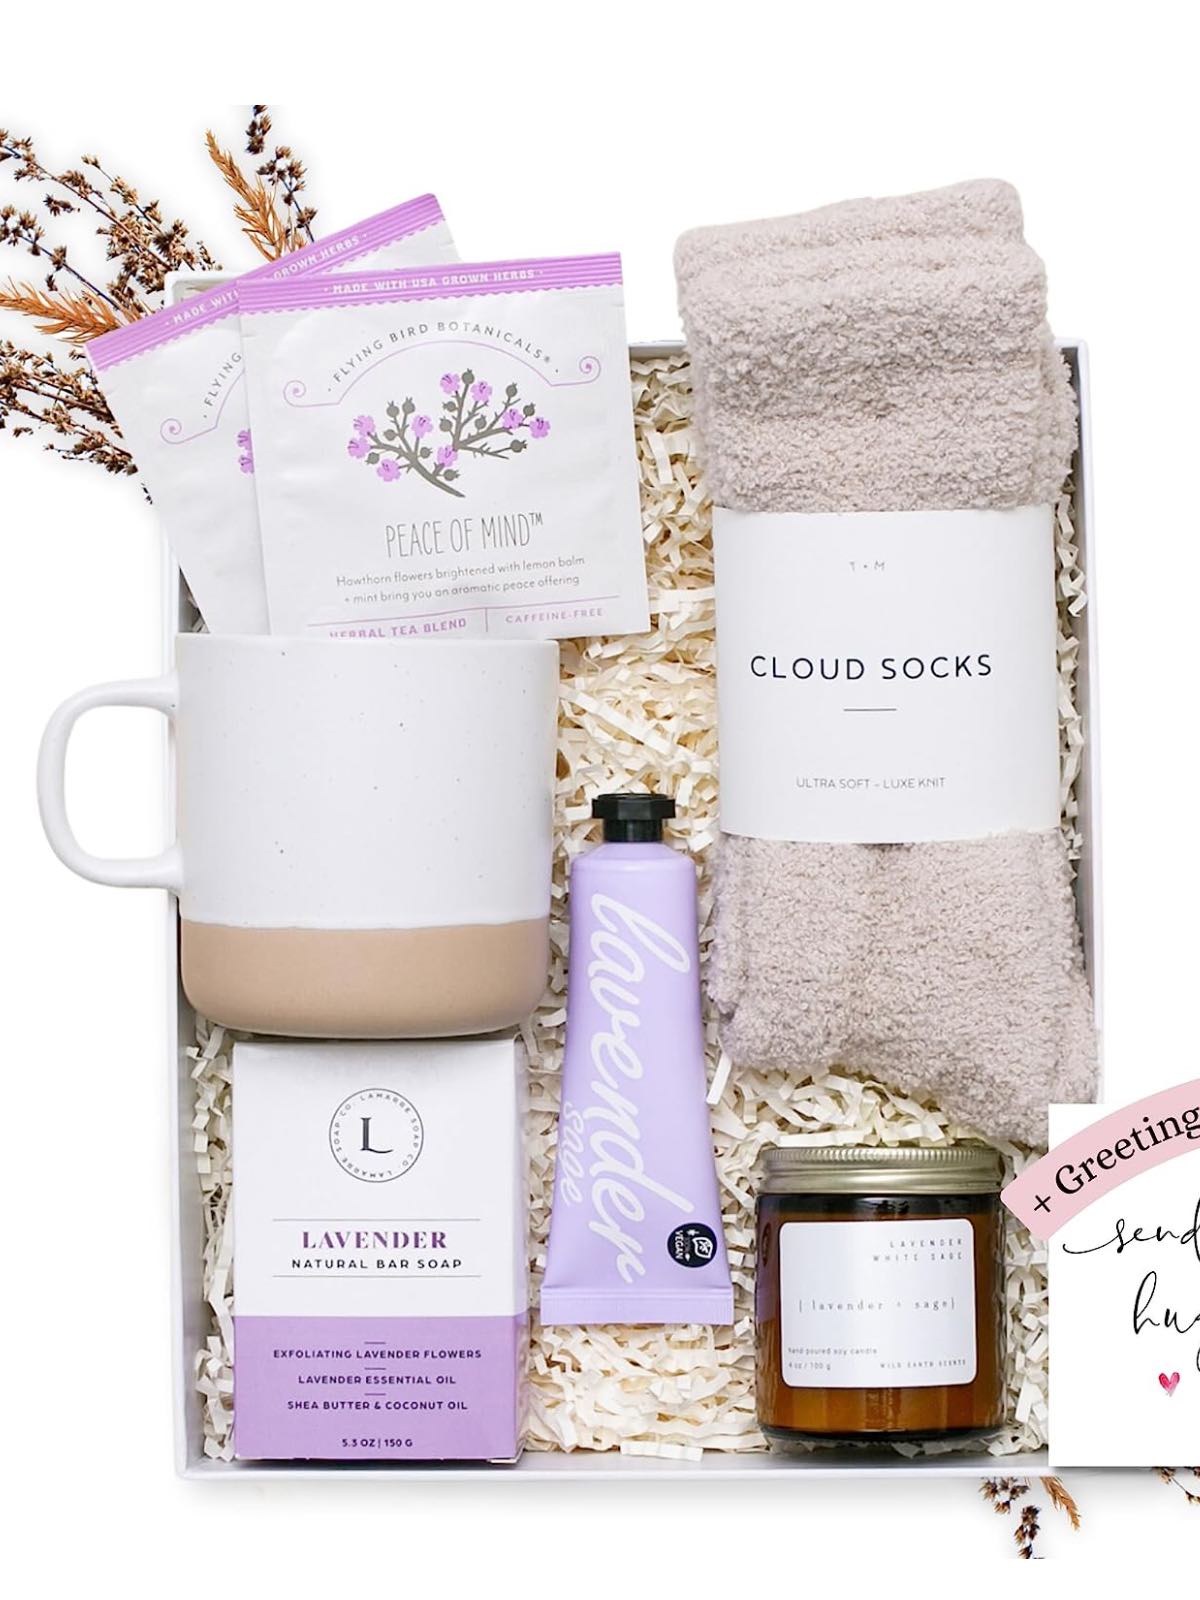 A get well gift basket with a soy candle, vegan lotion, cozy socks, a mug, and tea.